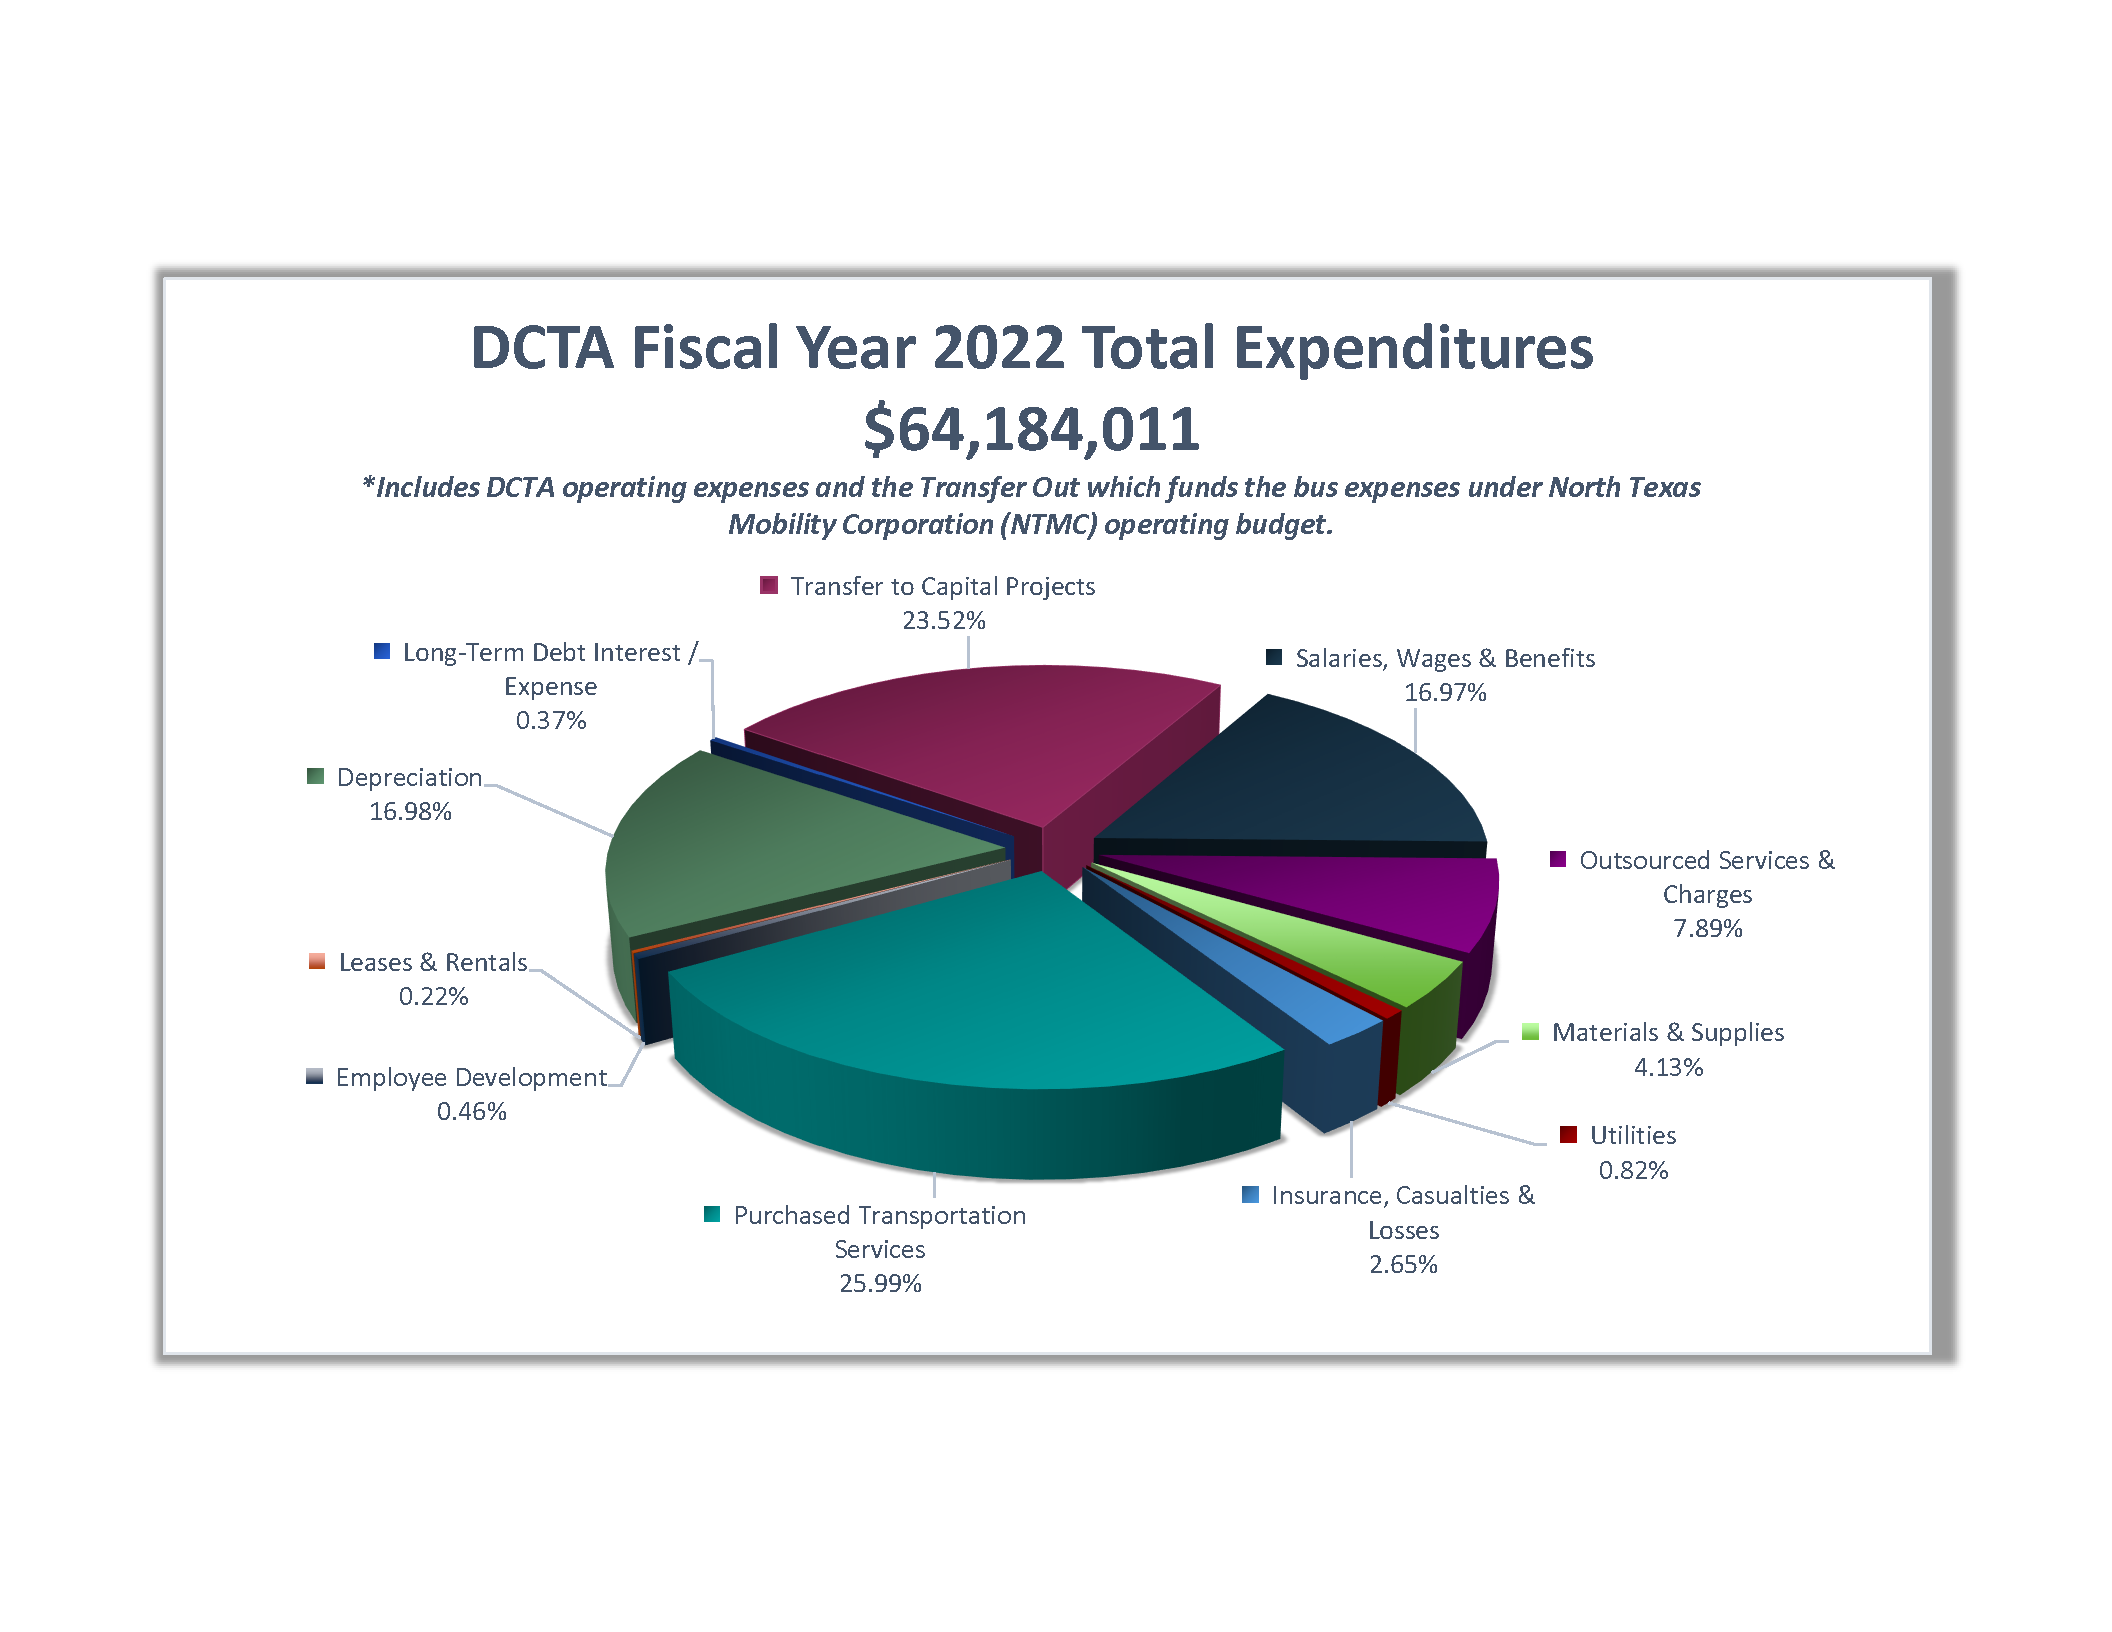 FY22 Total Expenditures